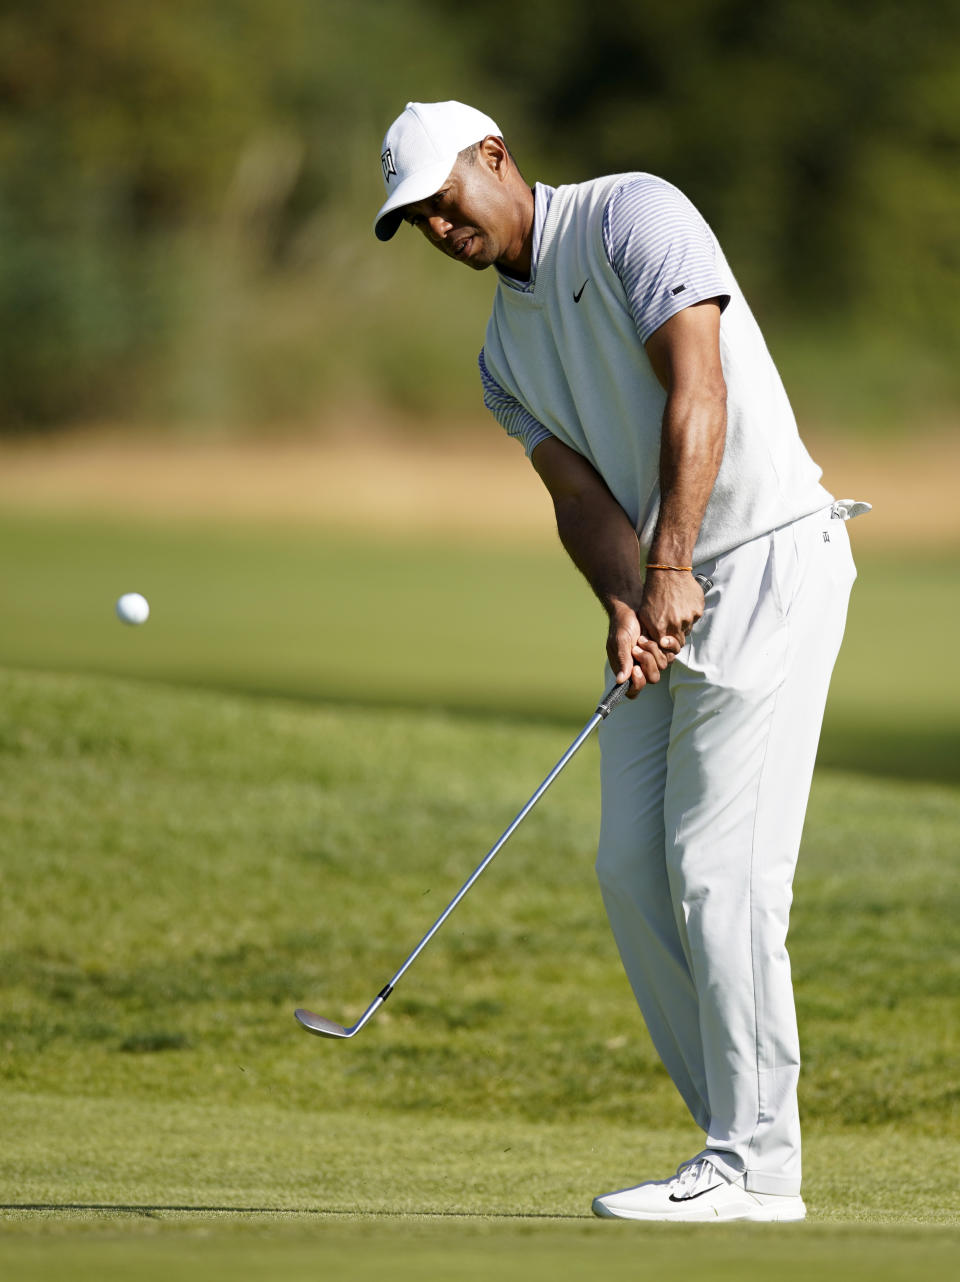 Tiger Woods chips onto the fourth green during the second round of the Genesis Invitational golf tournament at Riviera Country Club, Friday, Feb. 14, 2020, in the Pacific Palisades area of Los Angeles. (AP Photo/Ryan Kang)